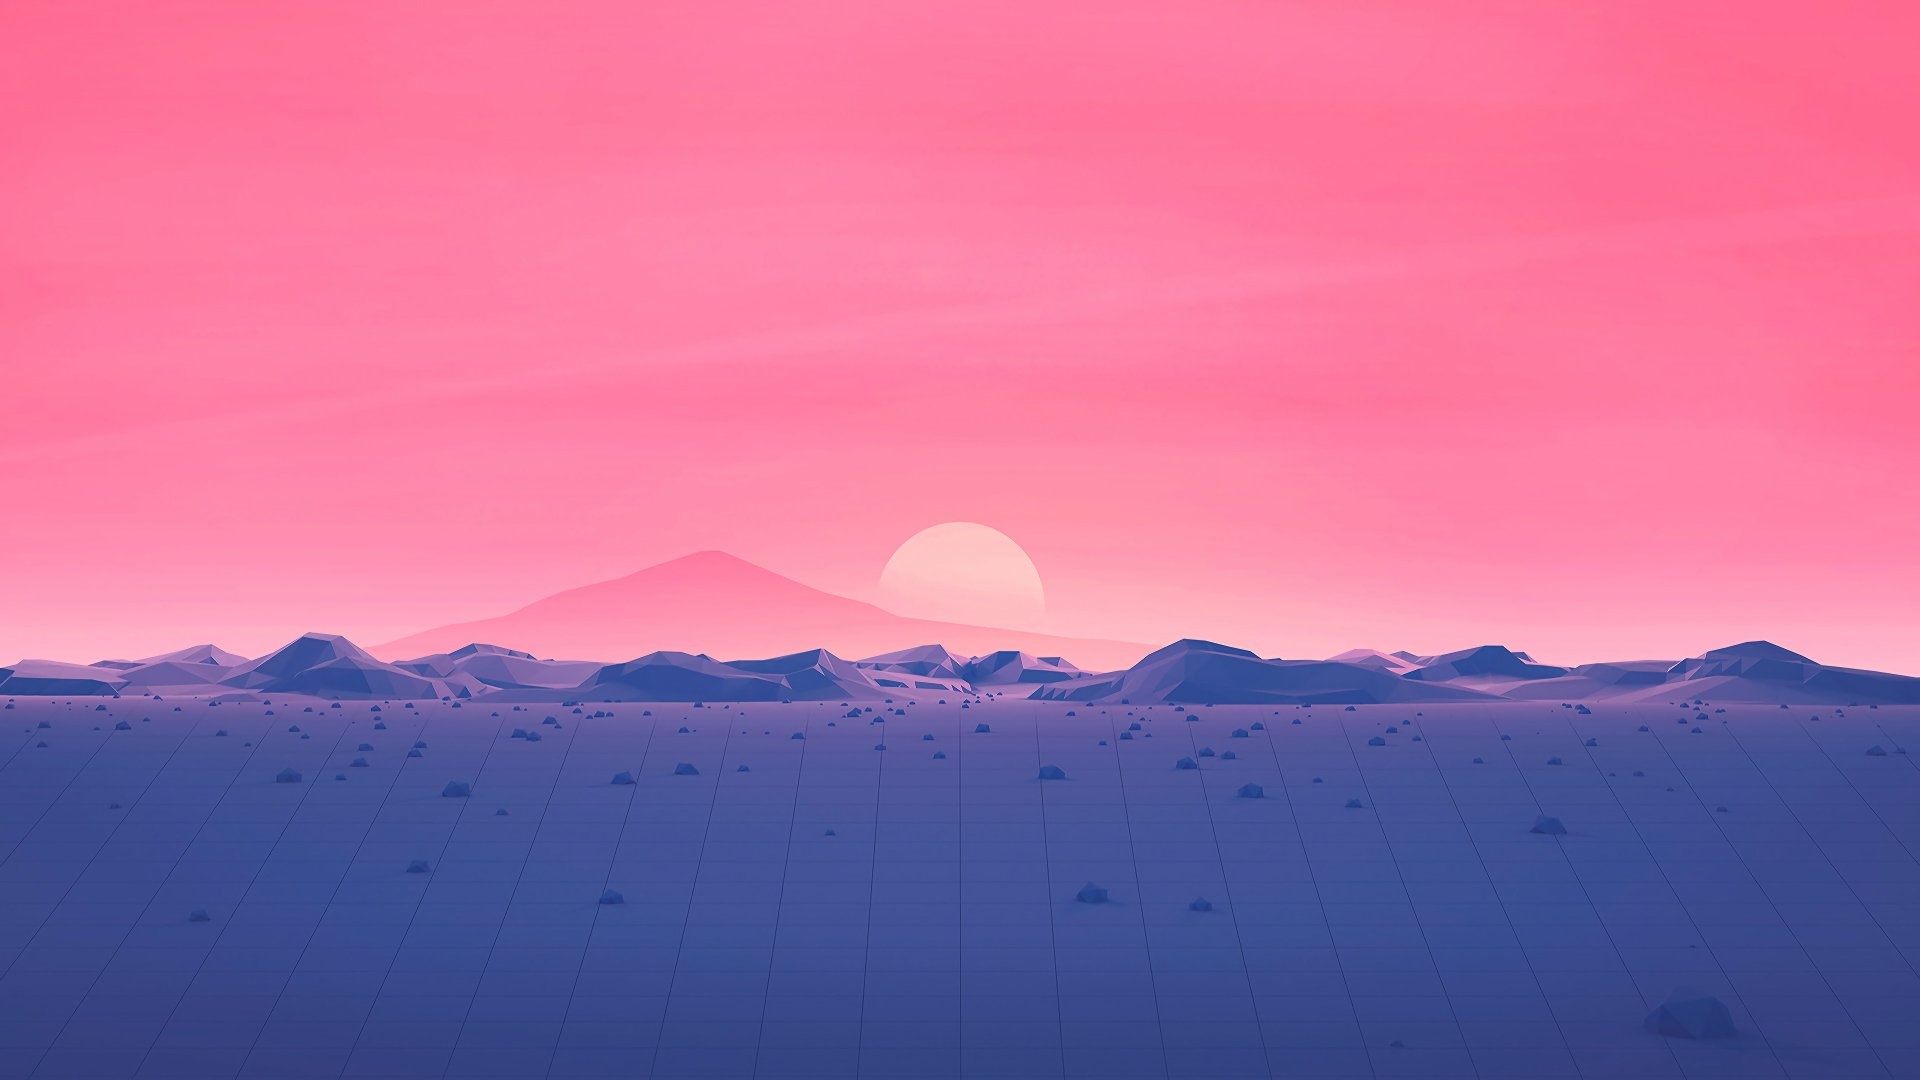 Low Poly Mountain free background